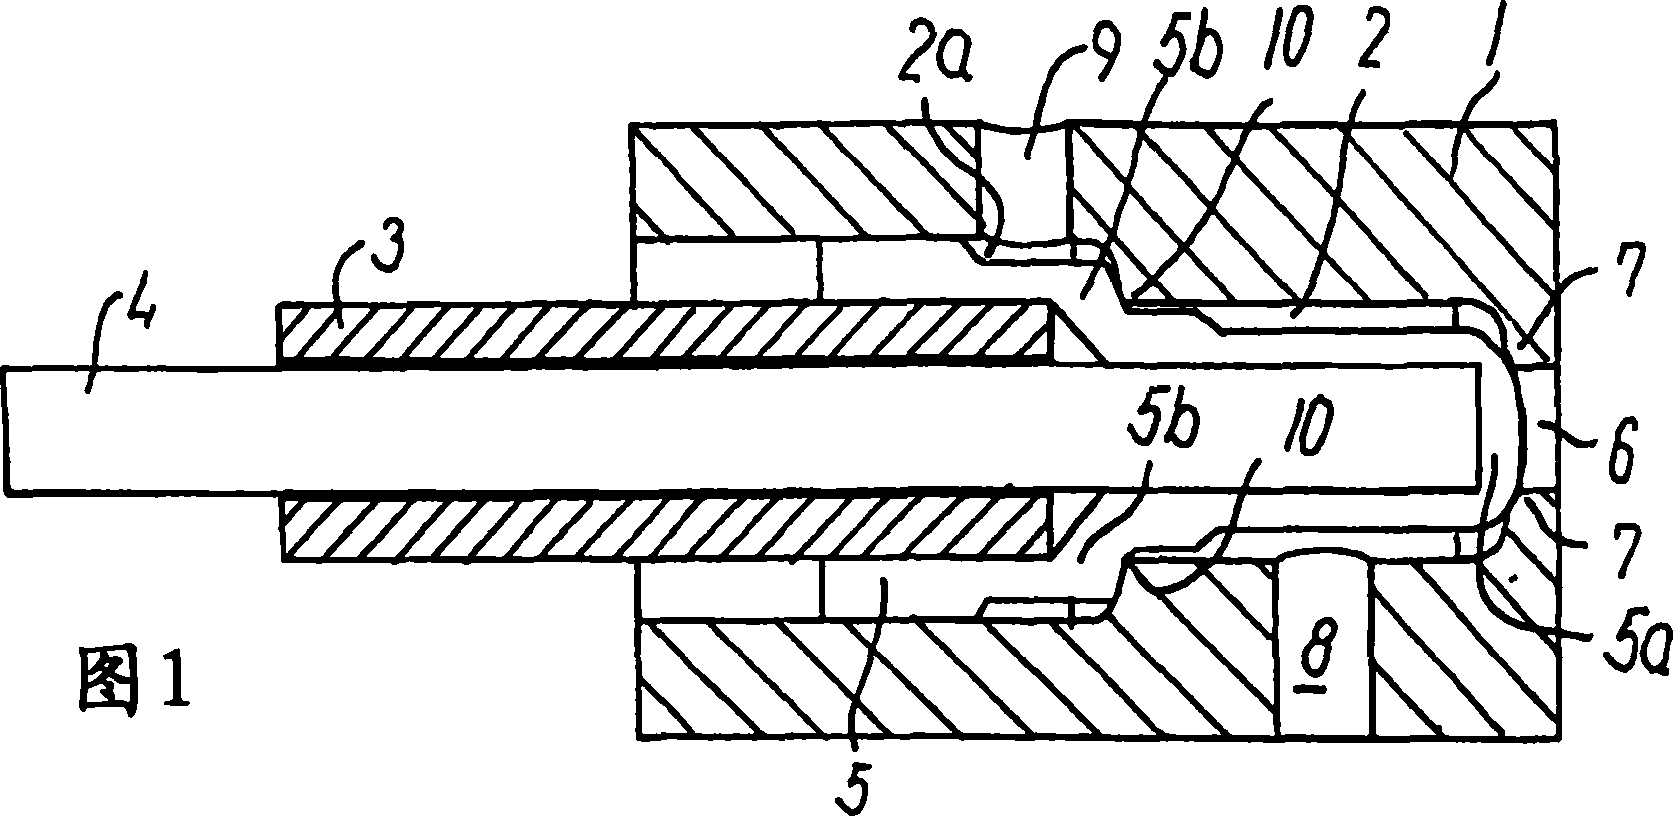 Valve for sterile sampling of a liquid sample from a container